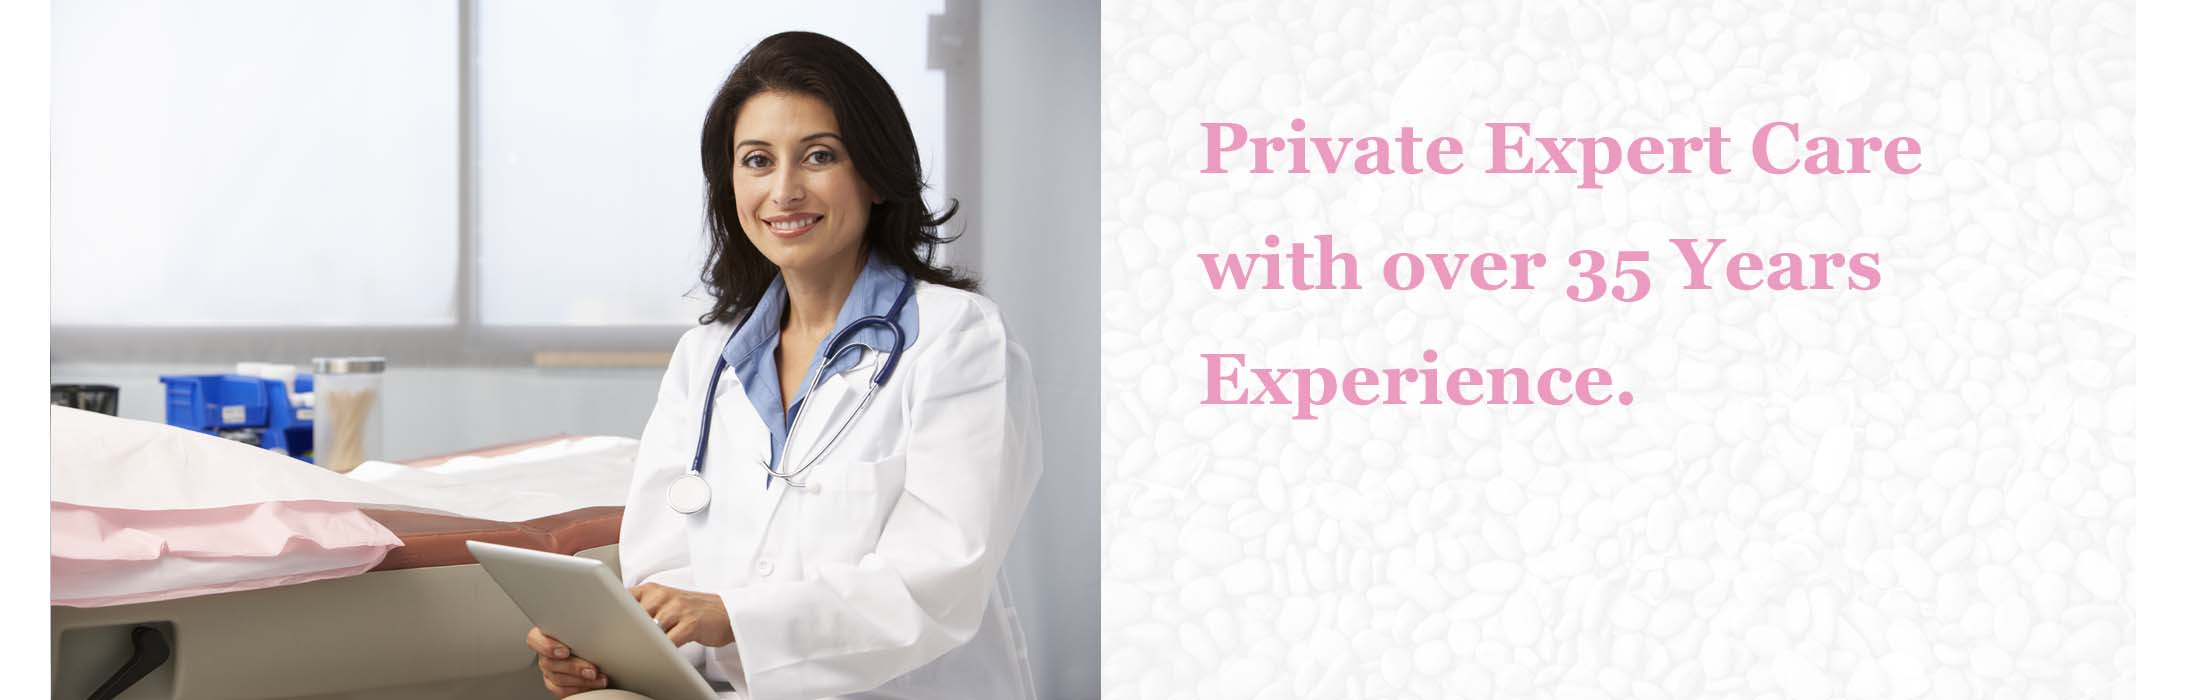 Private Expert Care with over 35 Years Experience.